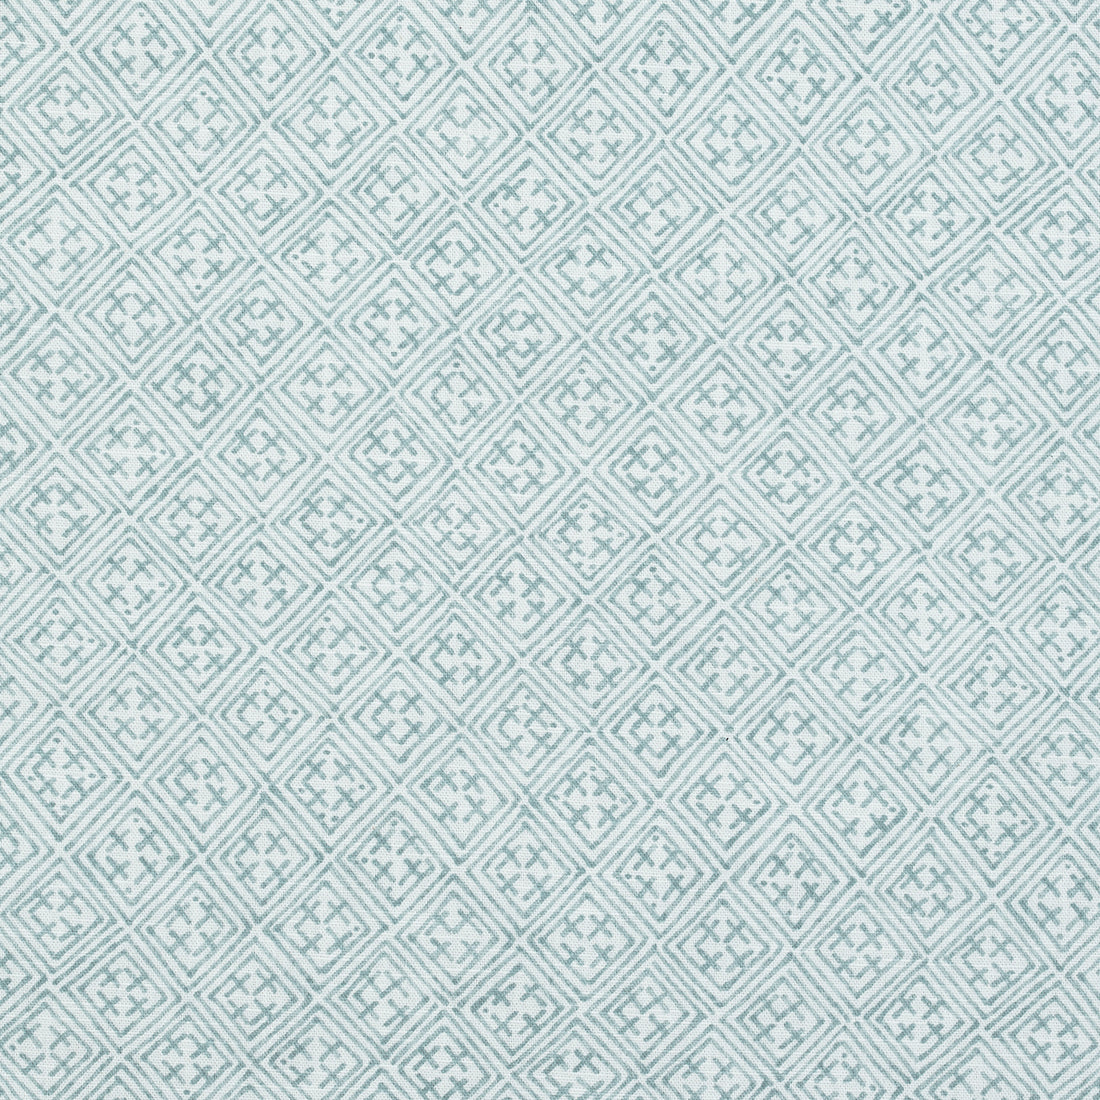 Laos fabric in aqua color - pattern number F972614 - by Thibaut in the Chestnut Hill collection